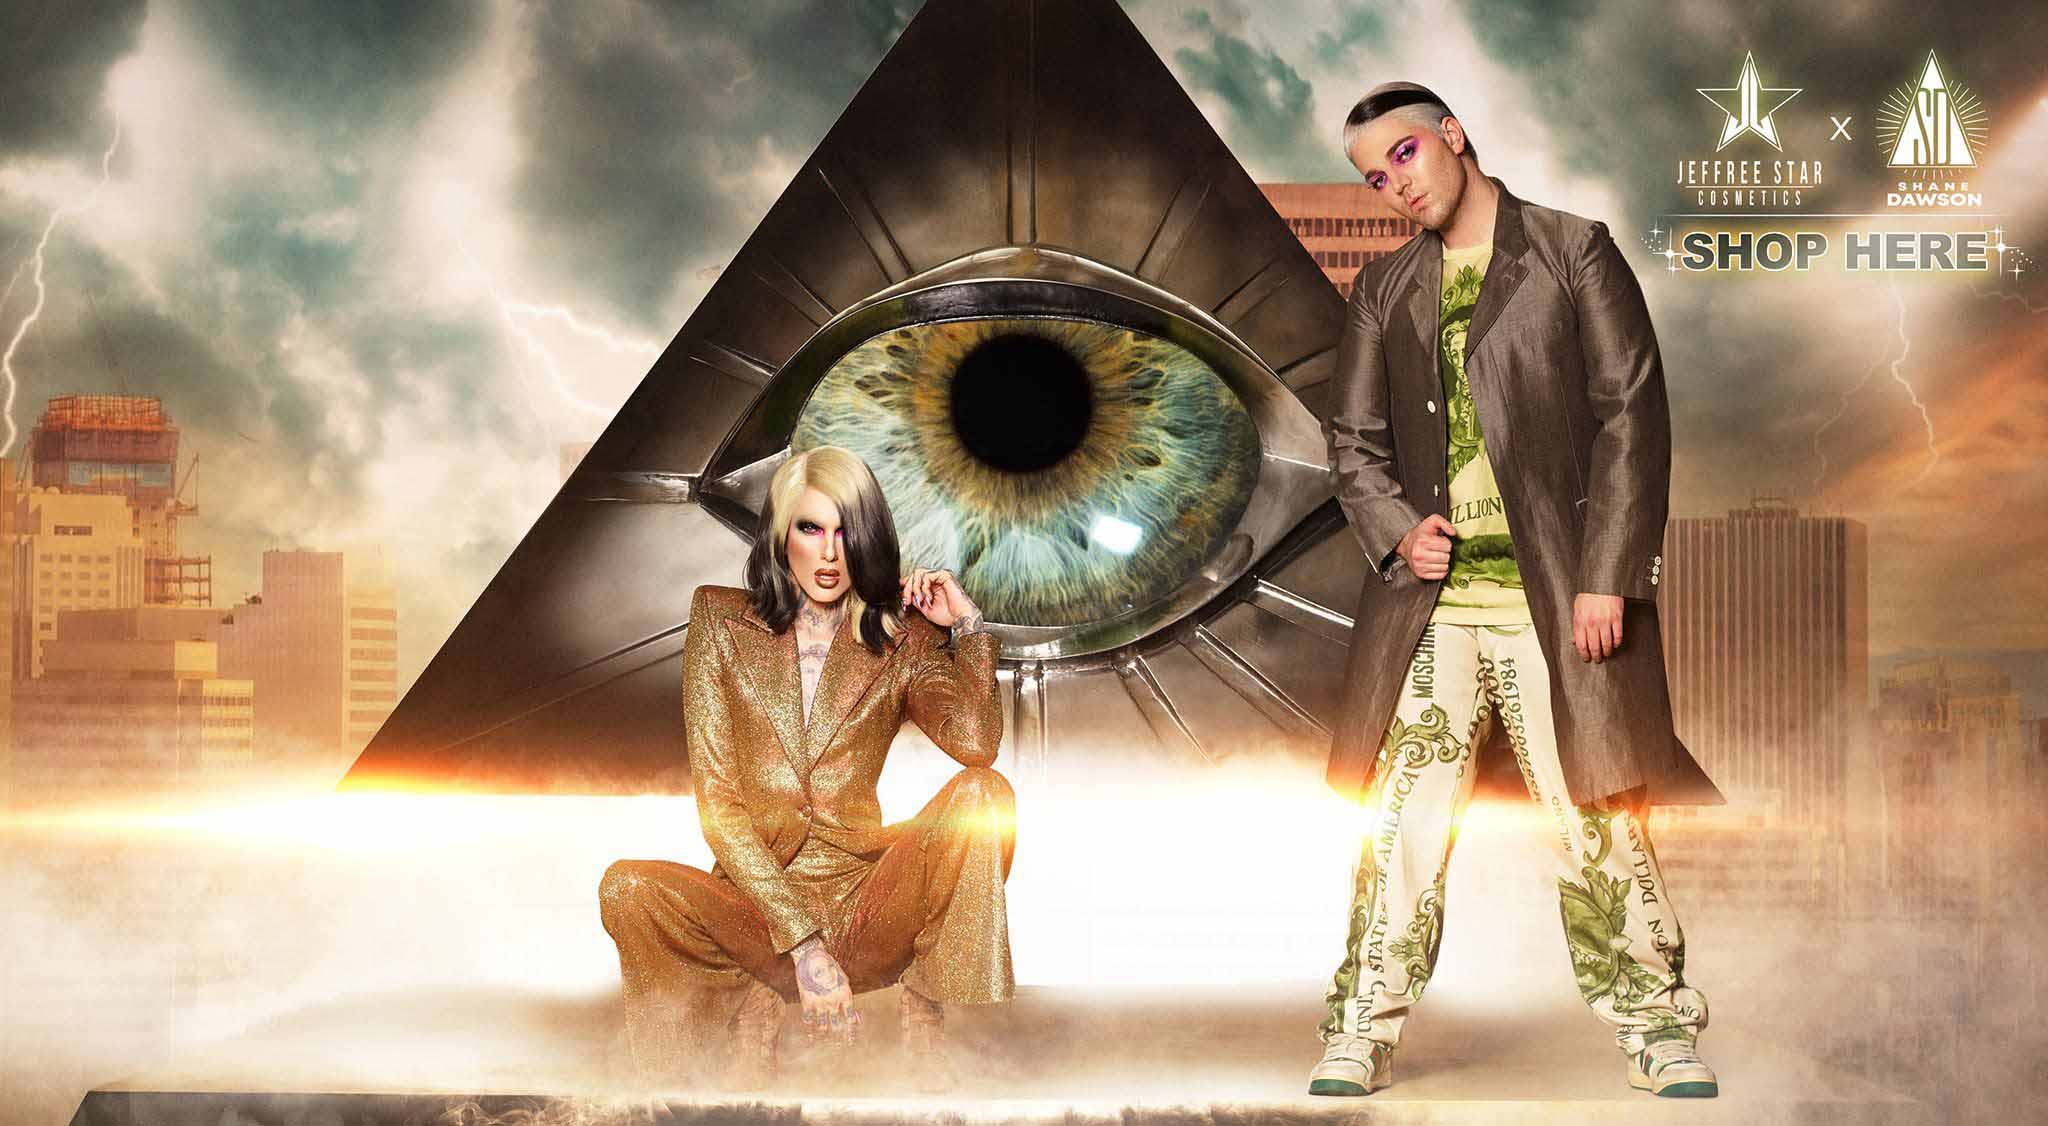 Shane Dawson and Jeffree Star’s ‘Conspiracy’ Makeup Palette